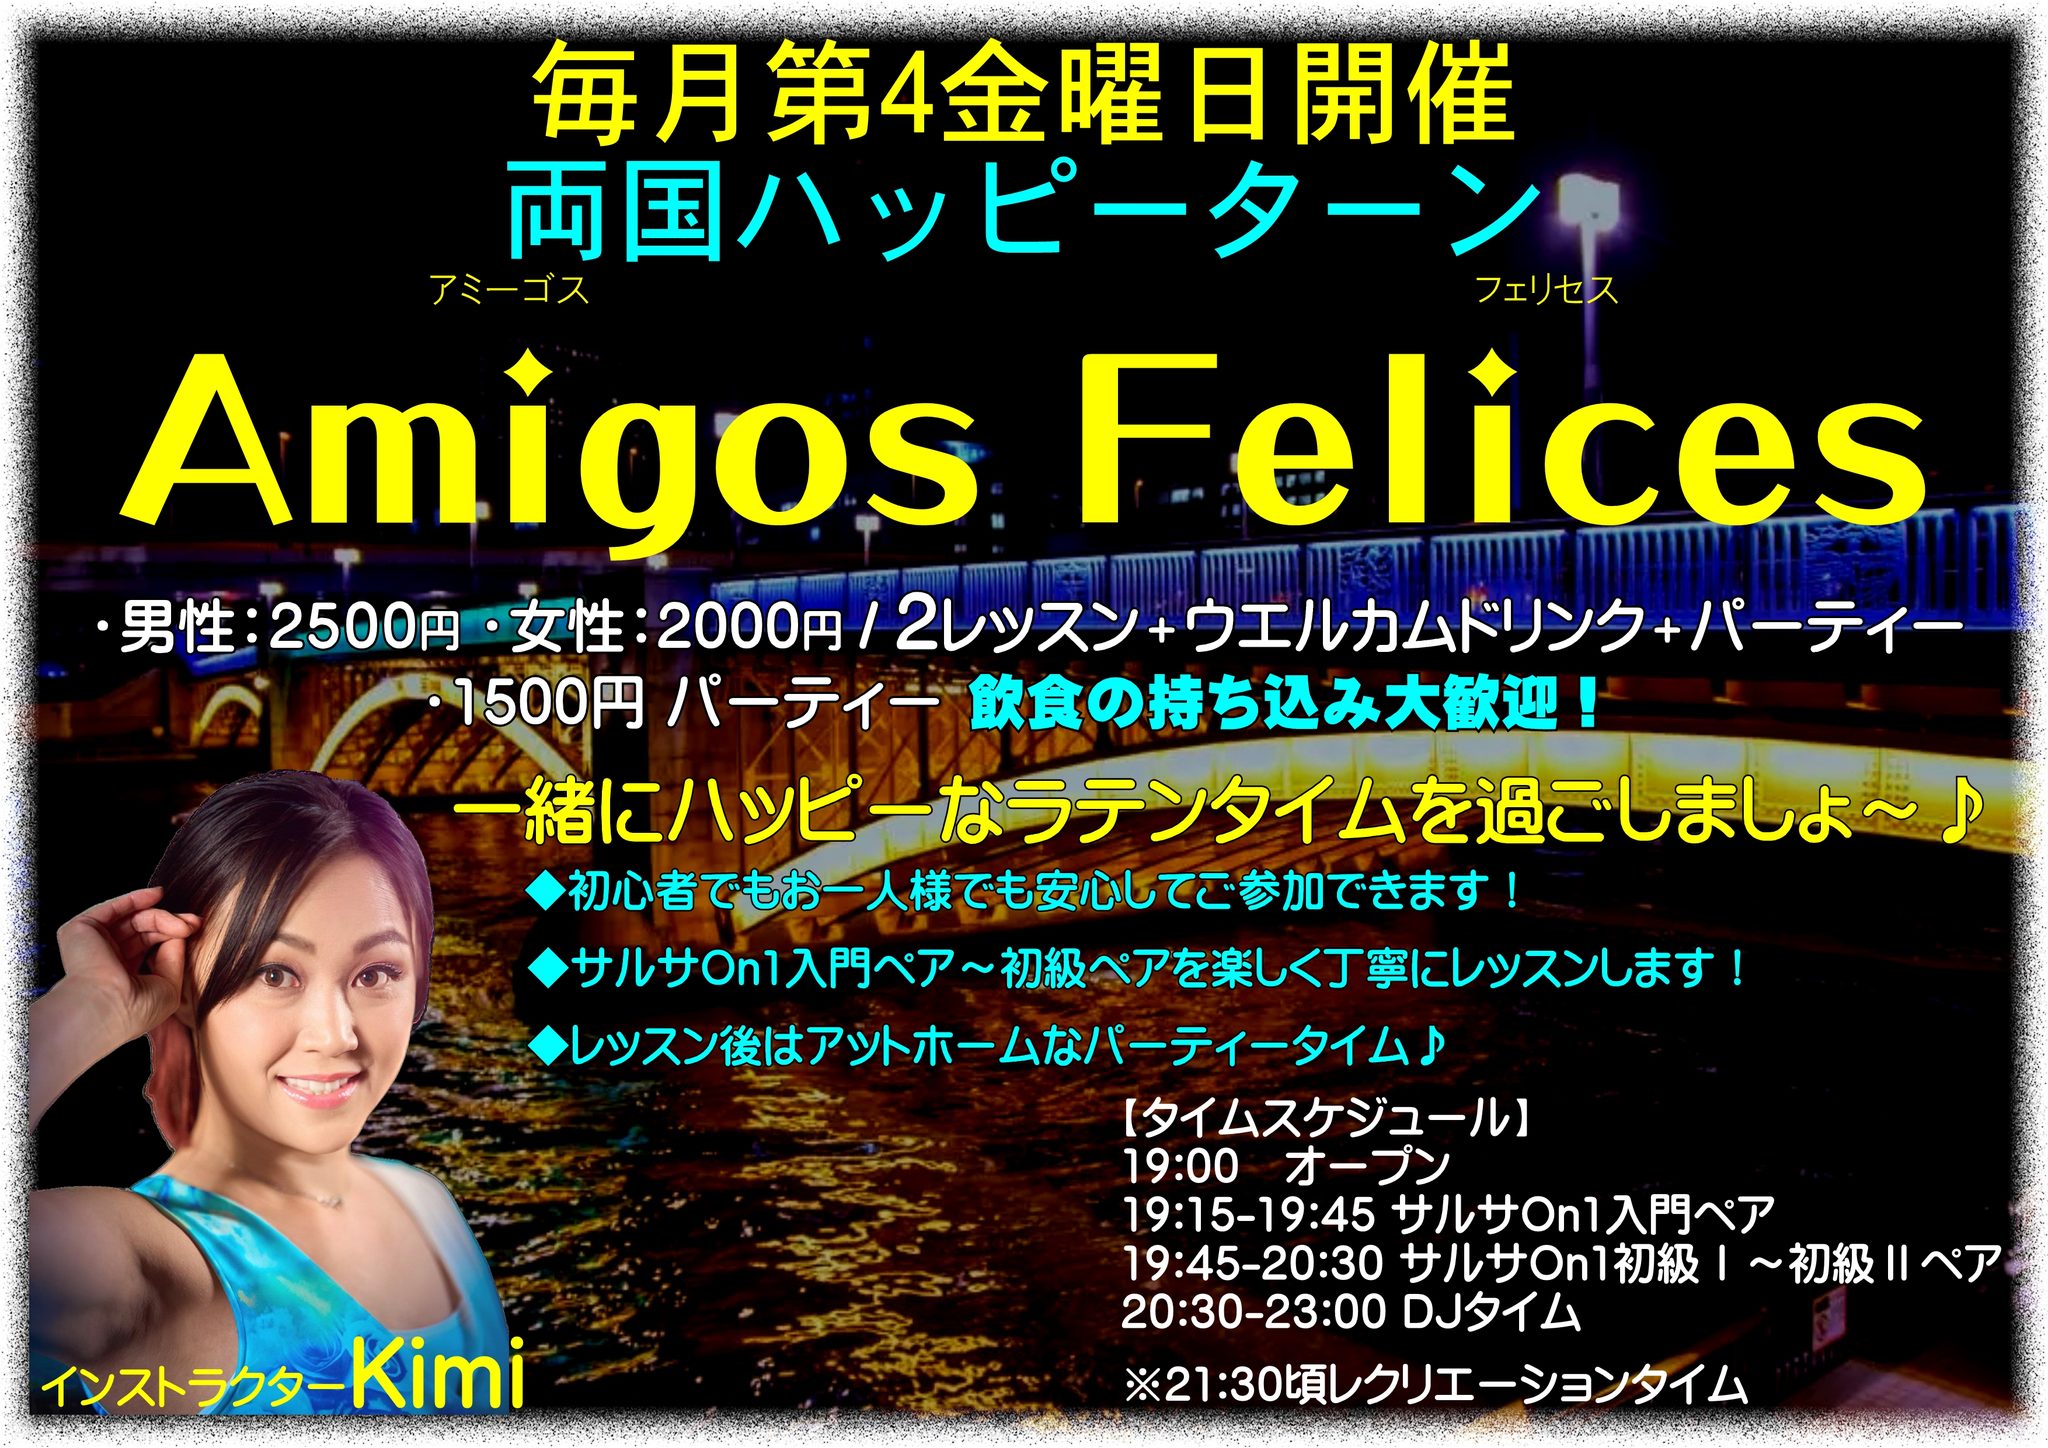 Amigos Felices～アミーゴス・フェリセス～